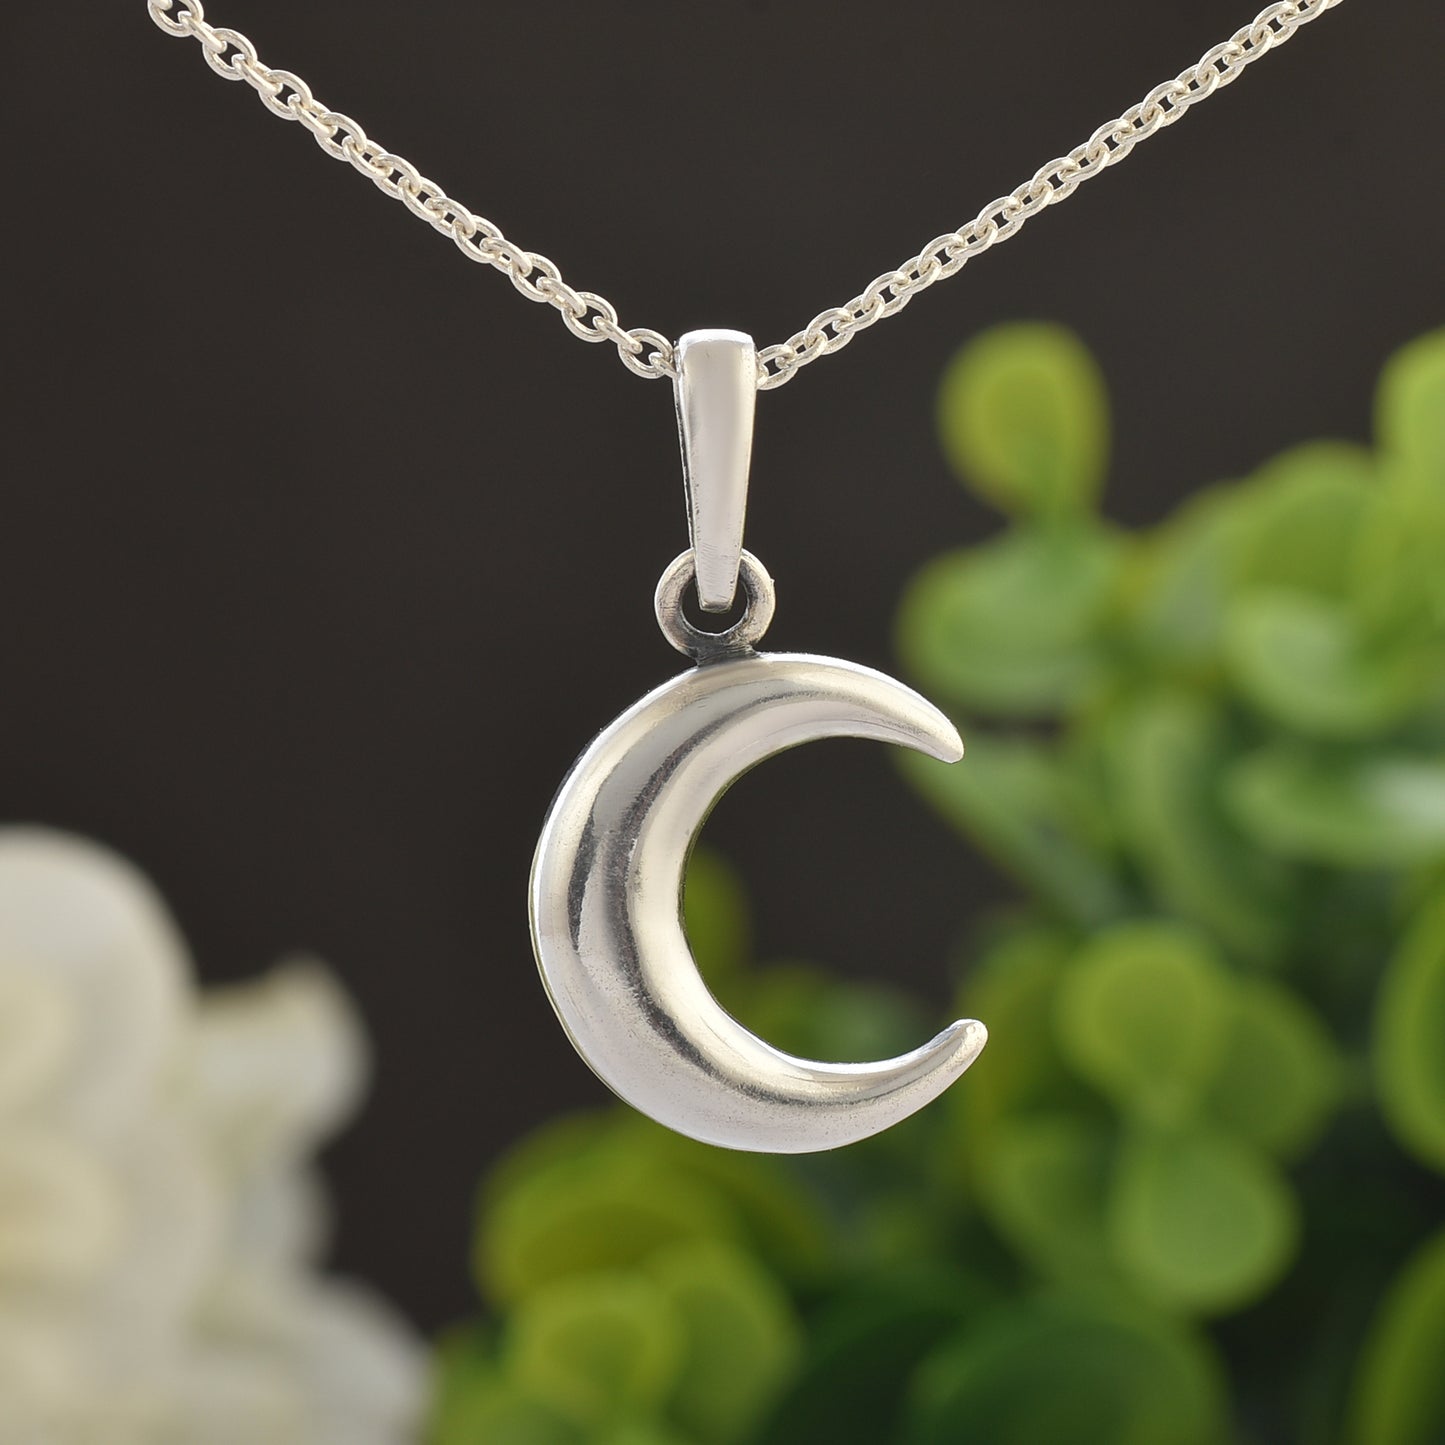 Silver moon pendant( Without chain)